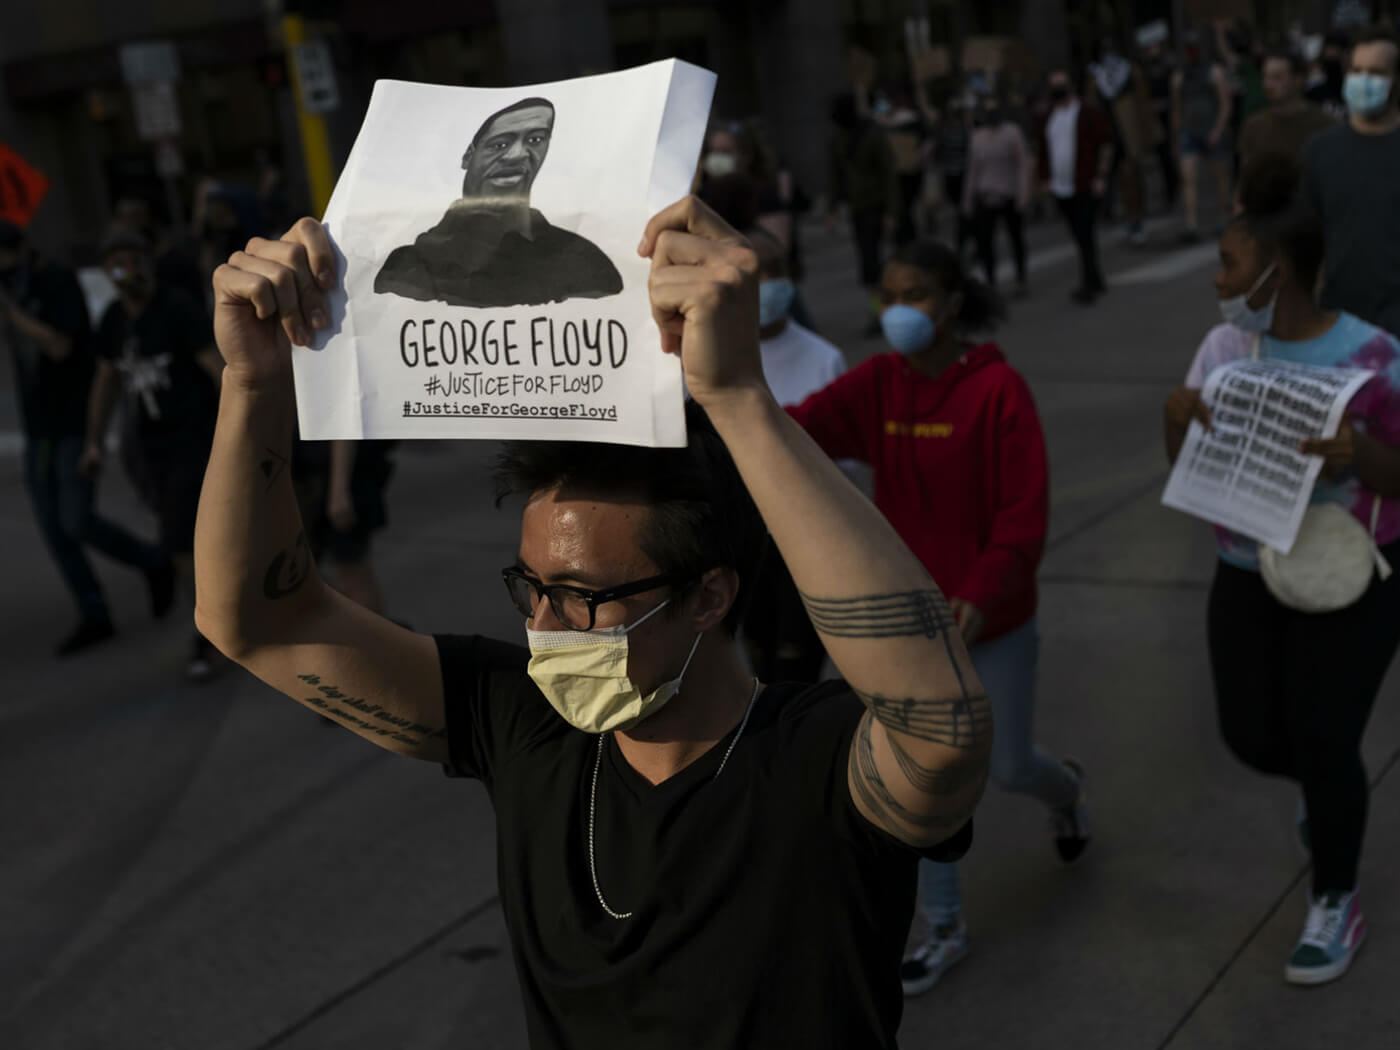 Protests in the wake of George Floyd's death